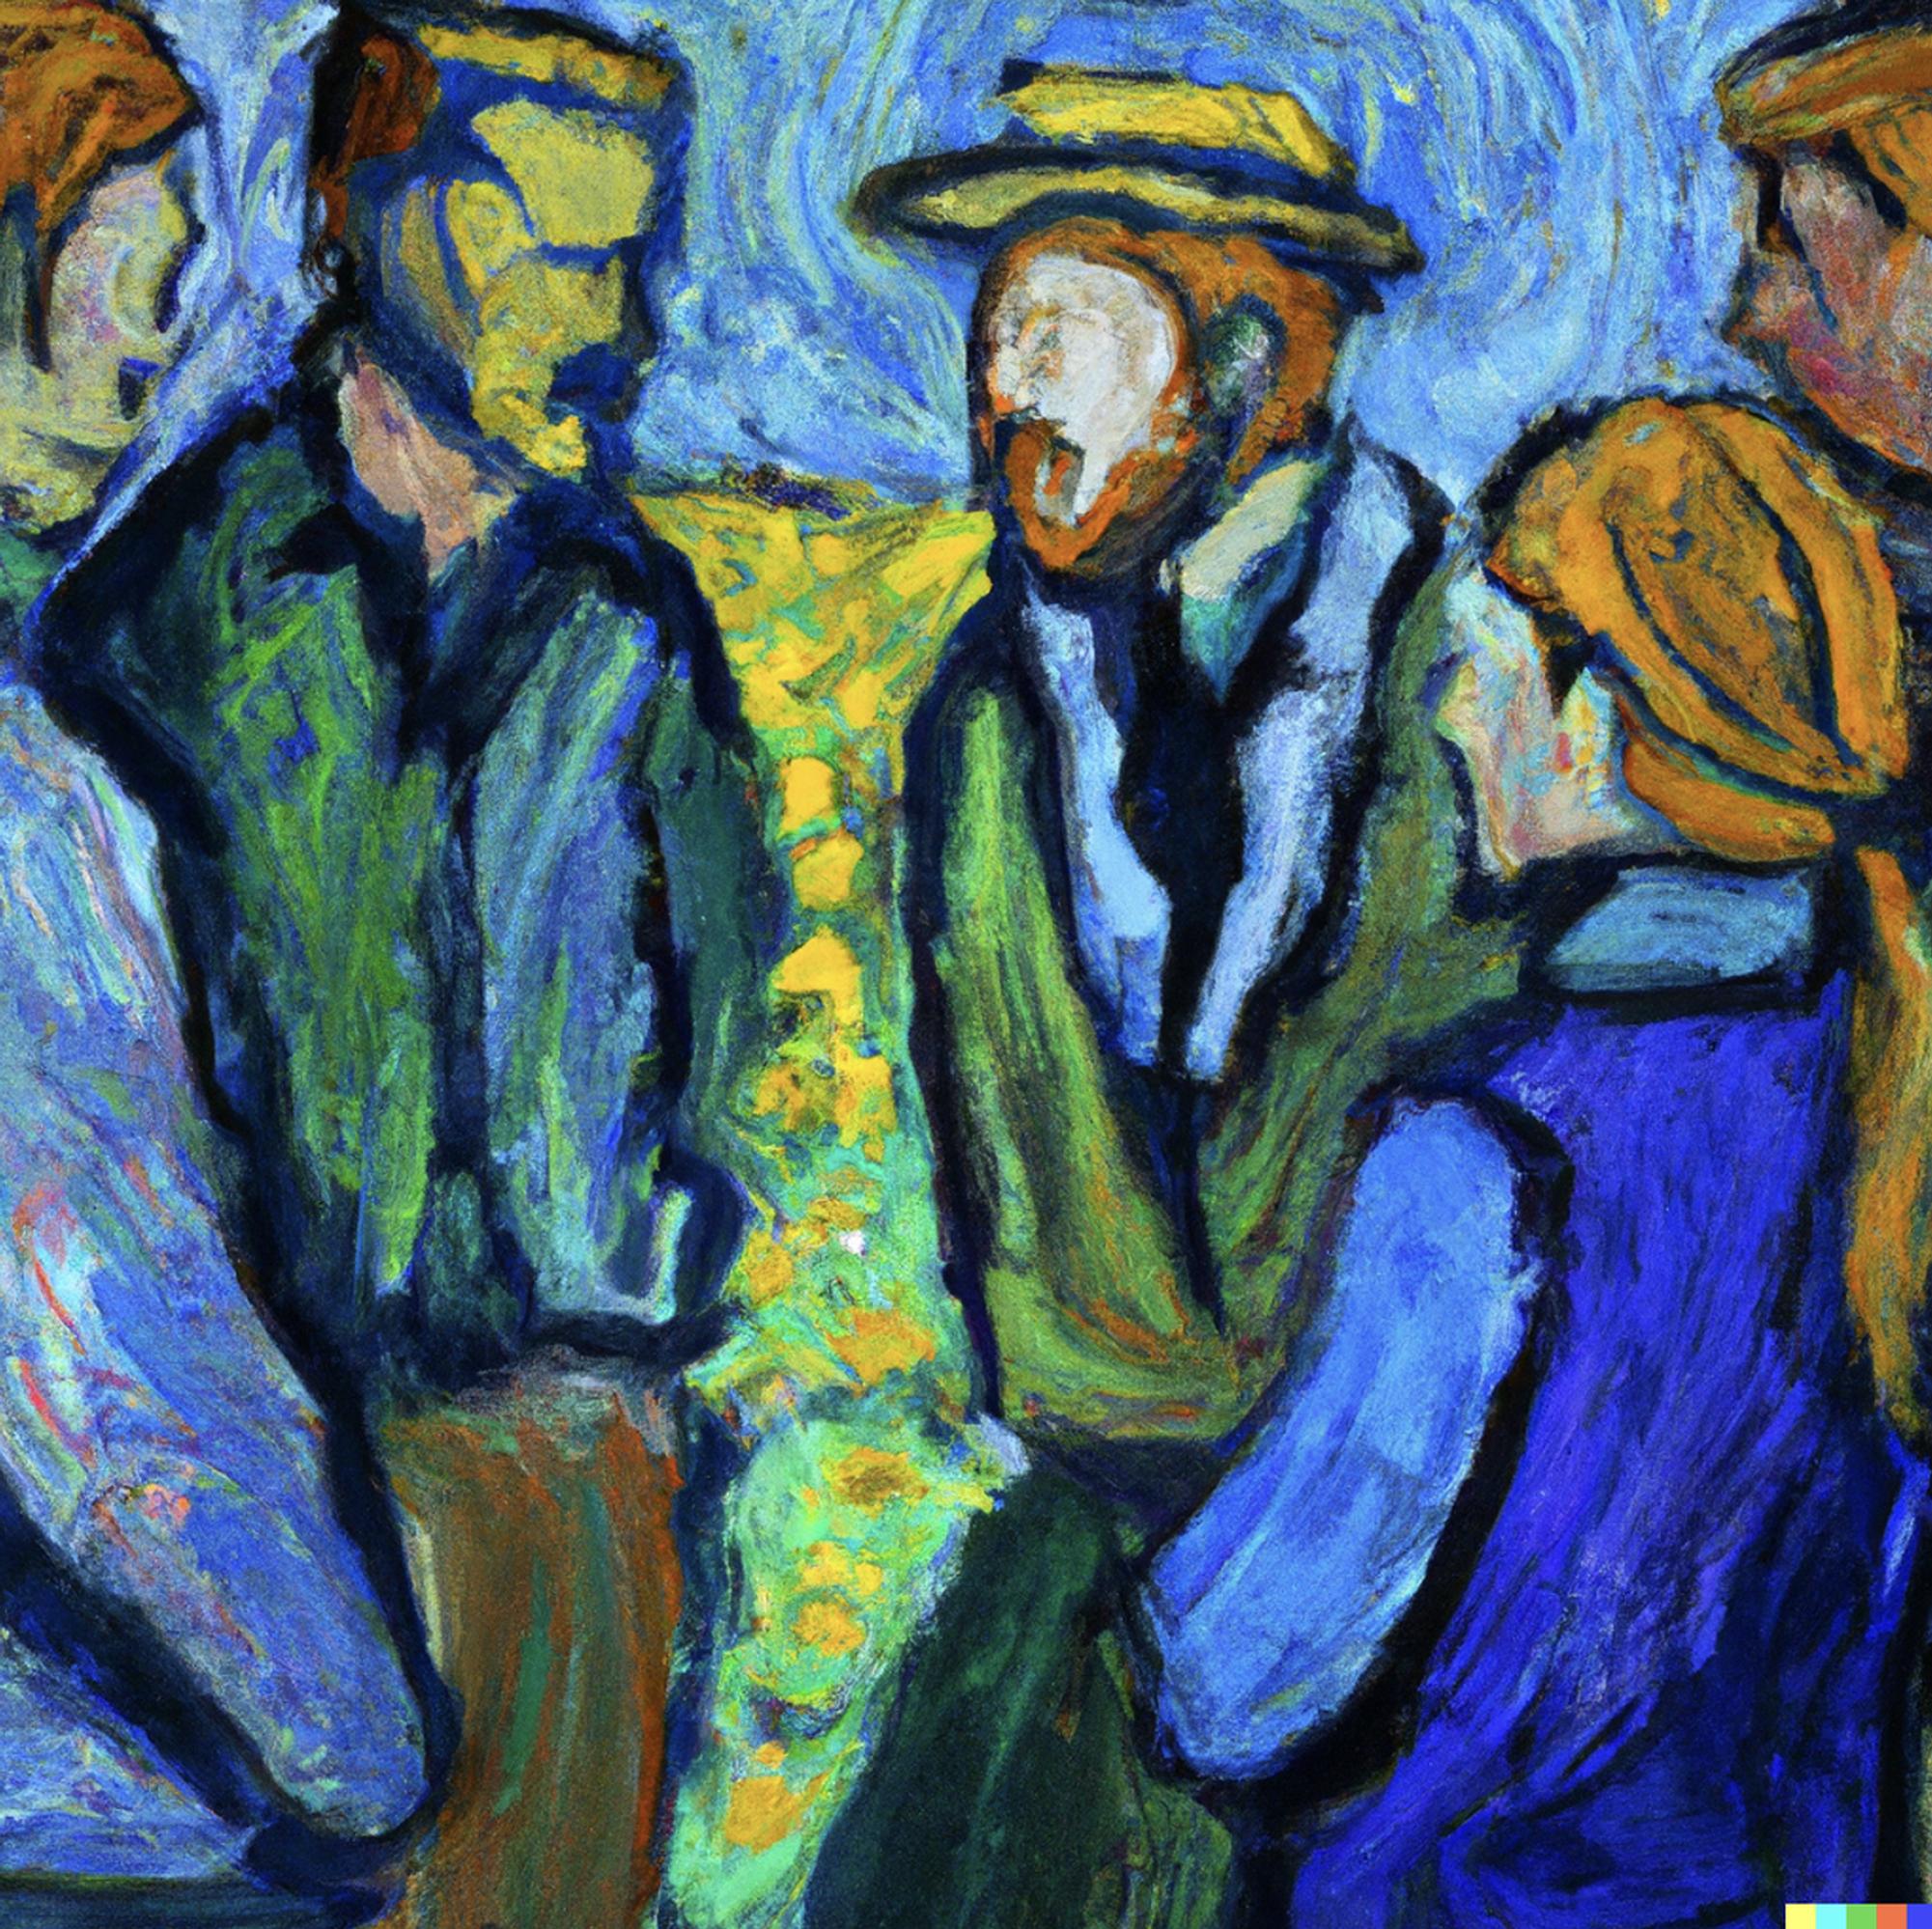 A DALL-E generated AI image of “a painting in the style of van Gogh of five people having a conversation”